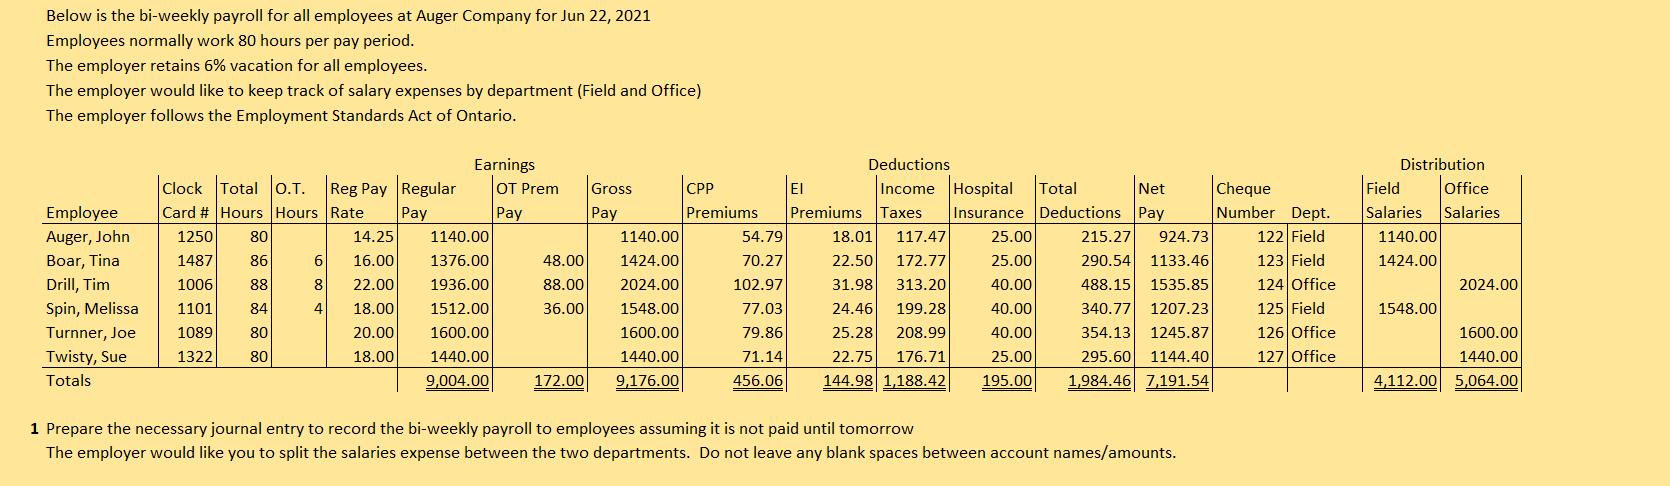 Below is the bi-weekly payroll for all employees at Auger Company for Jun 22, 2021 Employees normally work 80